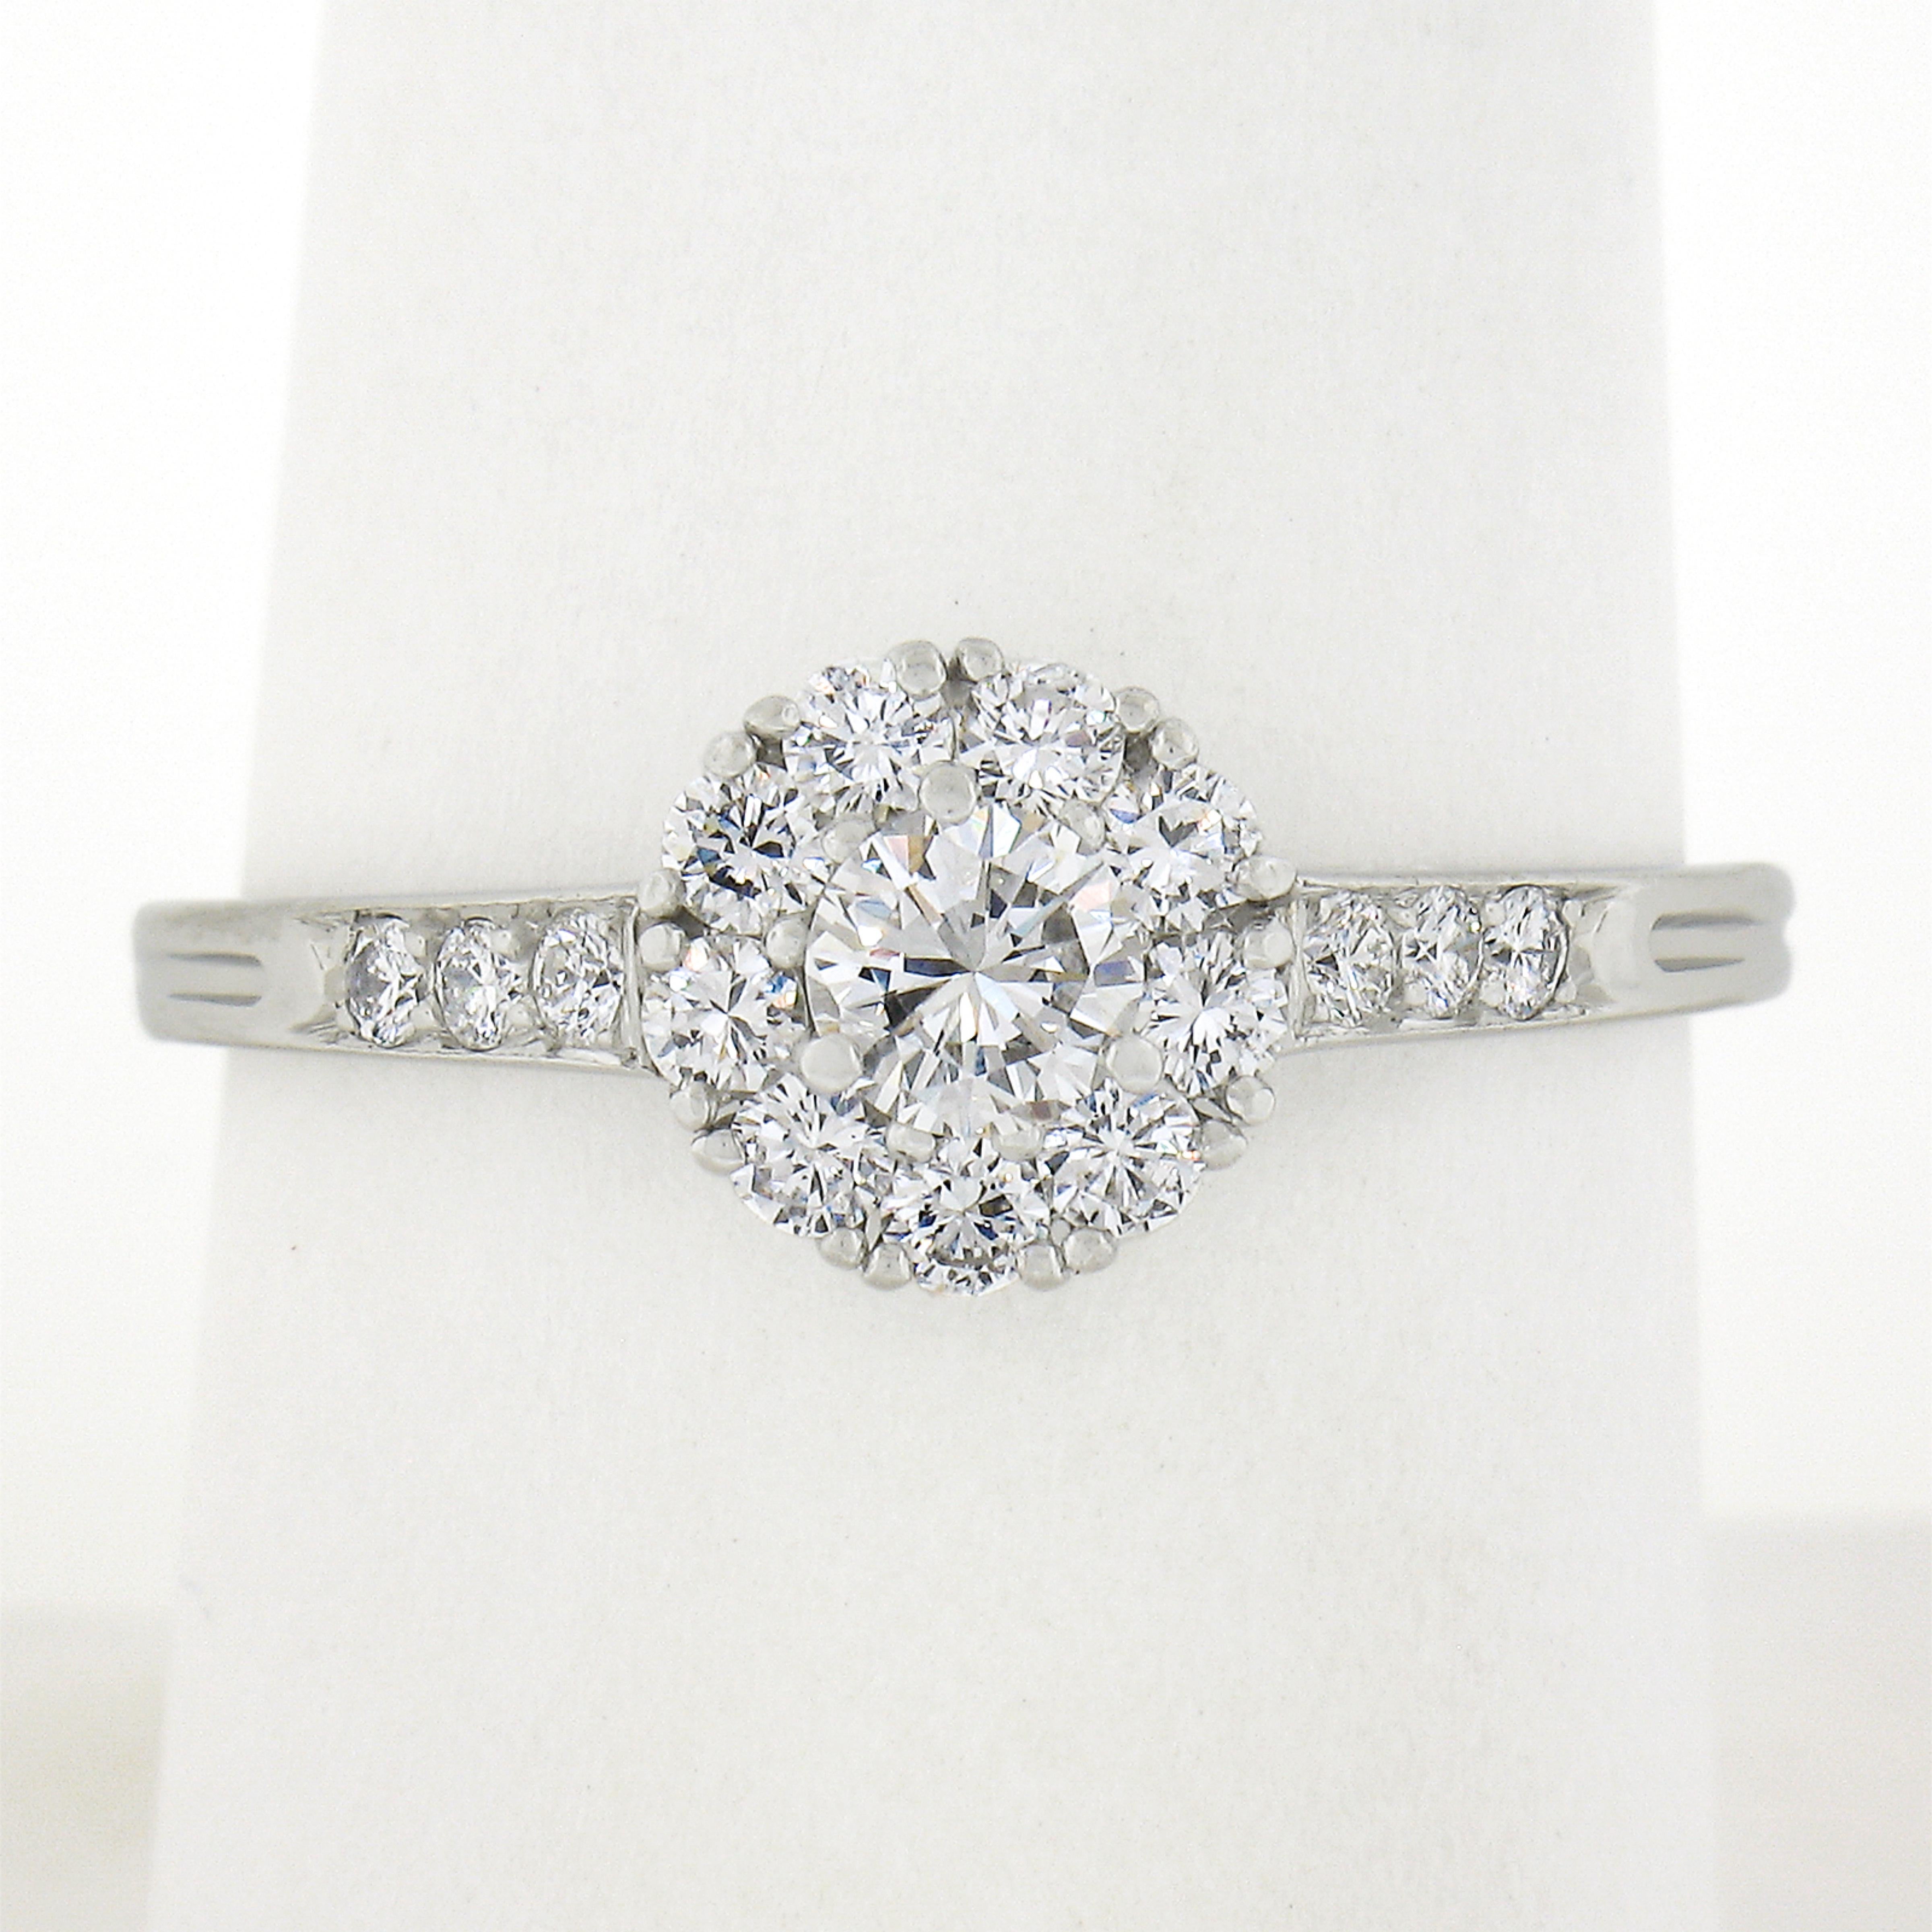 This beautiful vintage ring by Tiffany & Co. was crafted from solid platinum and features a fine diamond cluster at its center. A beautiful engagement or promise ring! Enjoy! 

--Stone(s):--
(1) Natural Genuine Diamond - Round Brilliant Cut -